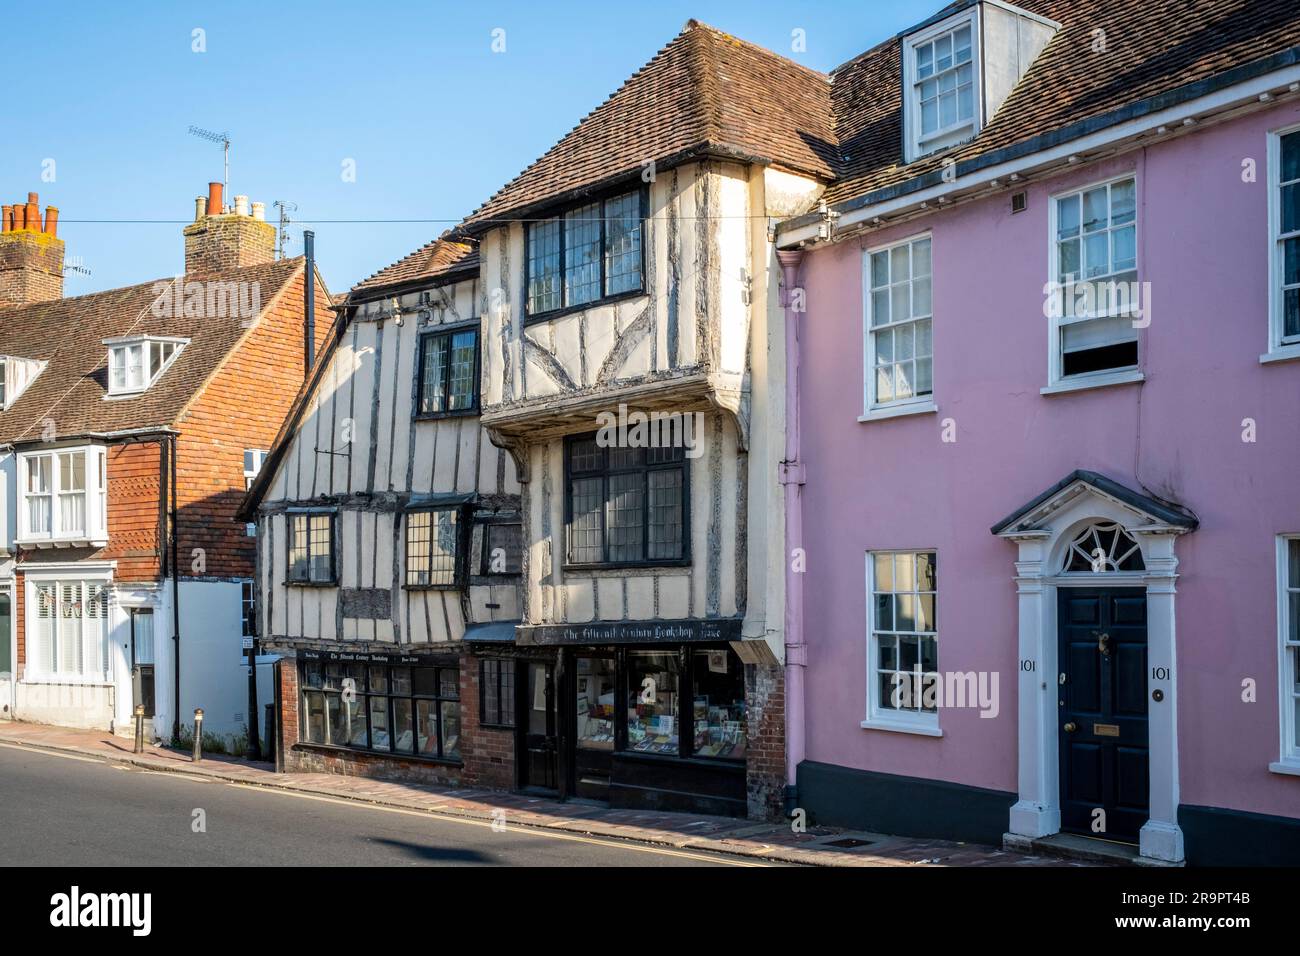 Colourful Houses in Lewes High Street, Lewes, East Sussex, Regno Unito. Foto Stock